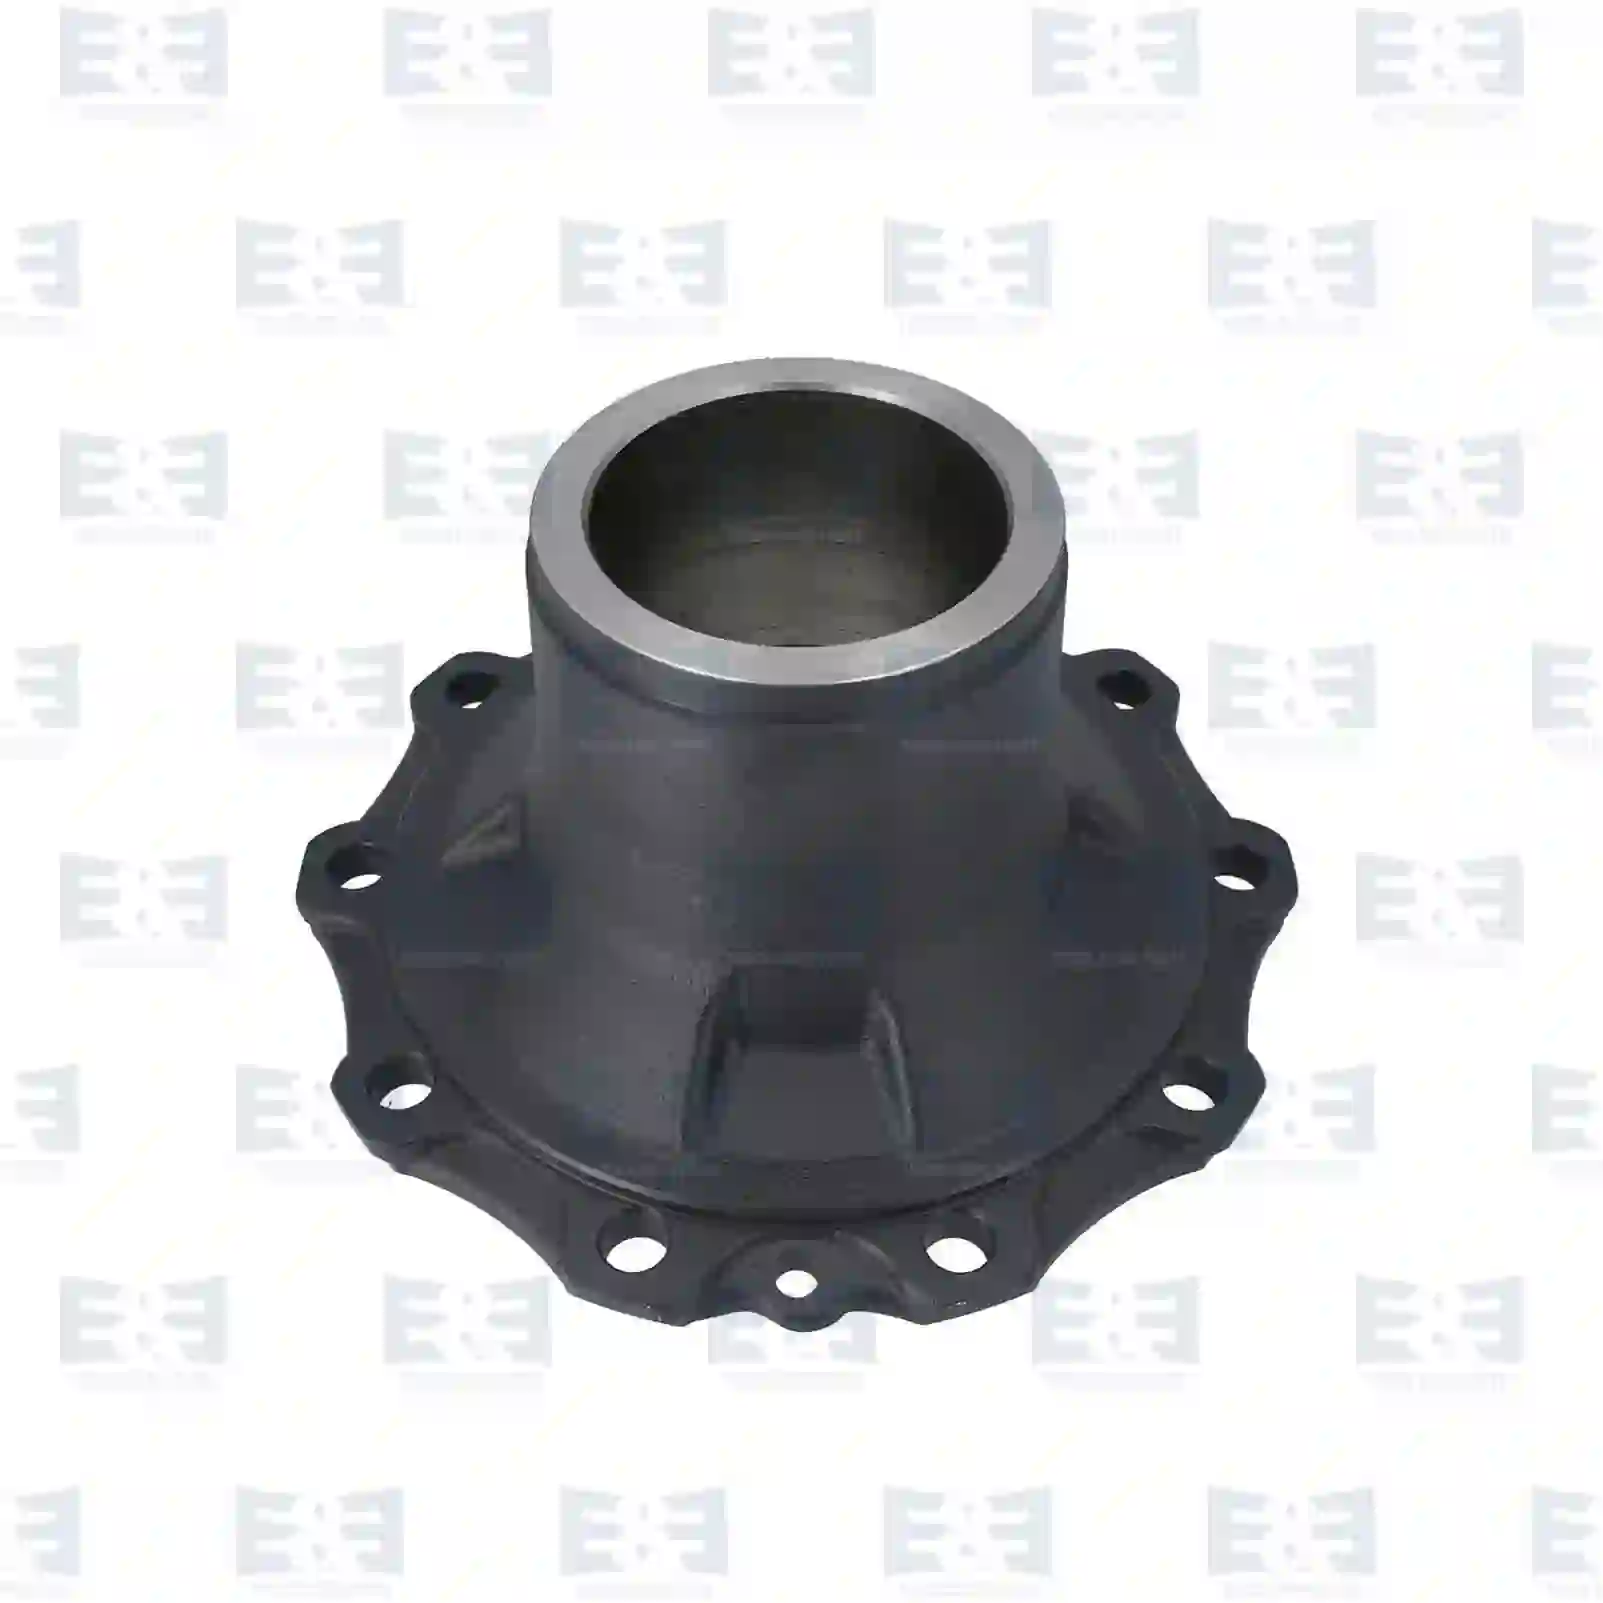 Wheel hub, without bearings, 2E2284600, 9603300125S, 9603300225S, 9603340001S, , , , ||  2E2284600 E&E Truck Spare Parts | Truck Spare Parts, Auotomotive Spare Parts Wheel hub, without bearings, 2E2284600, 9603300125S, 9603300225S, 9603340001S, , , , ||  2E2284600 E&E Truck Spare Parts | Truck Spare Parts, Auotomotive Spare Parts